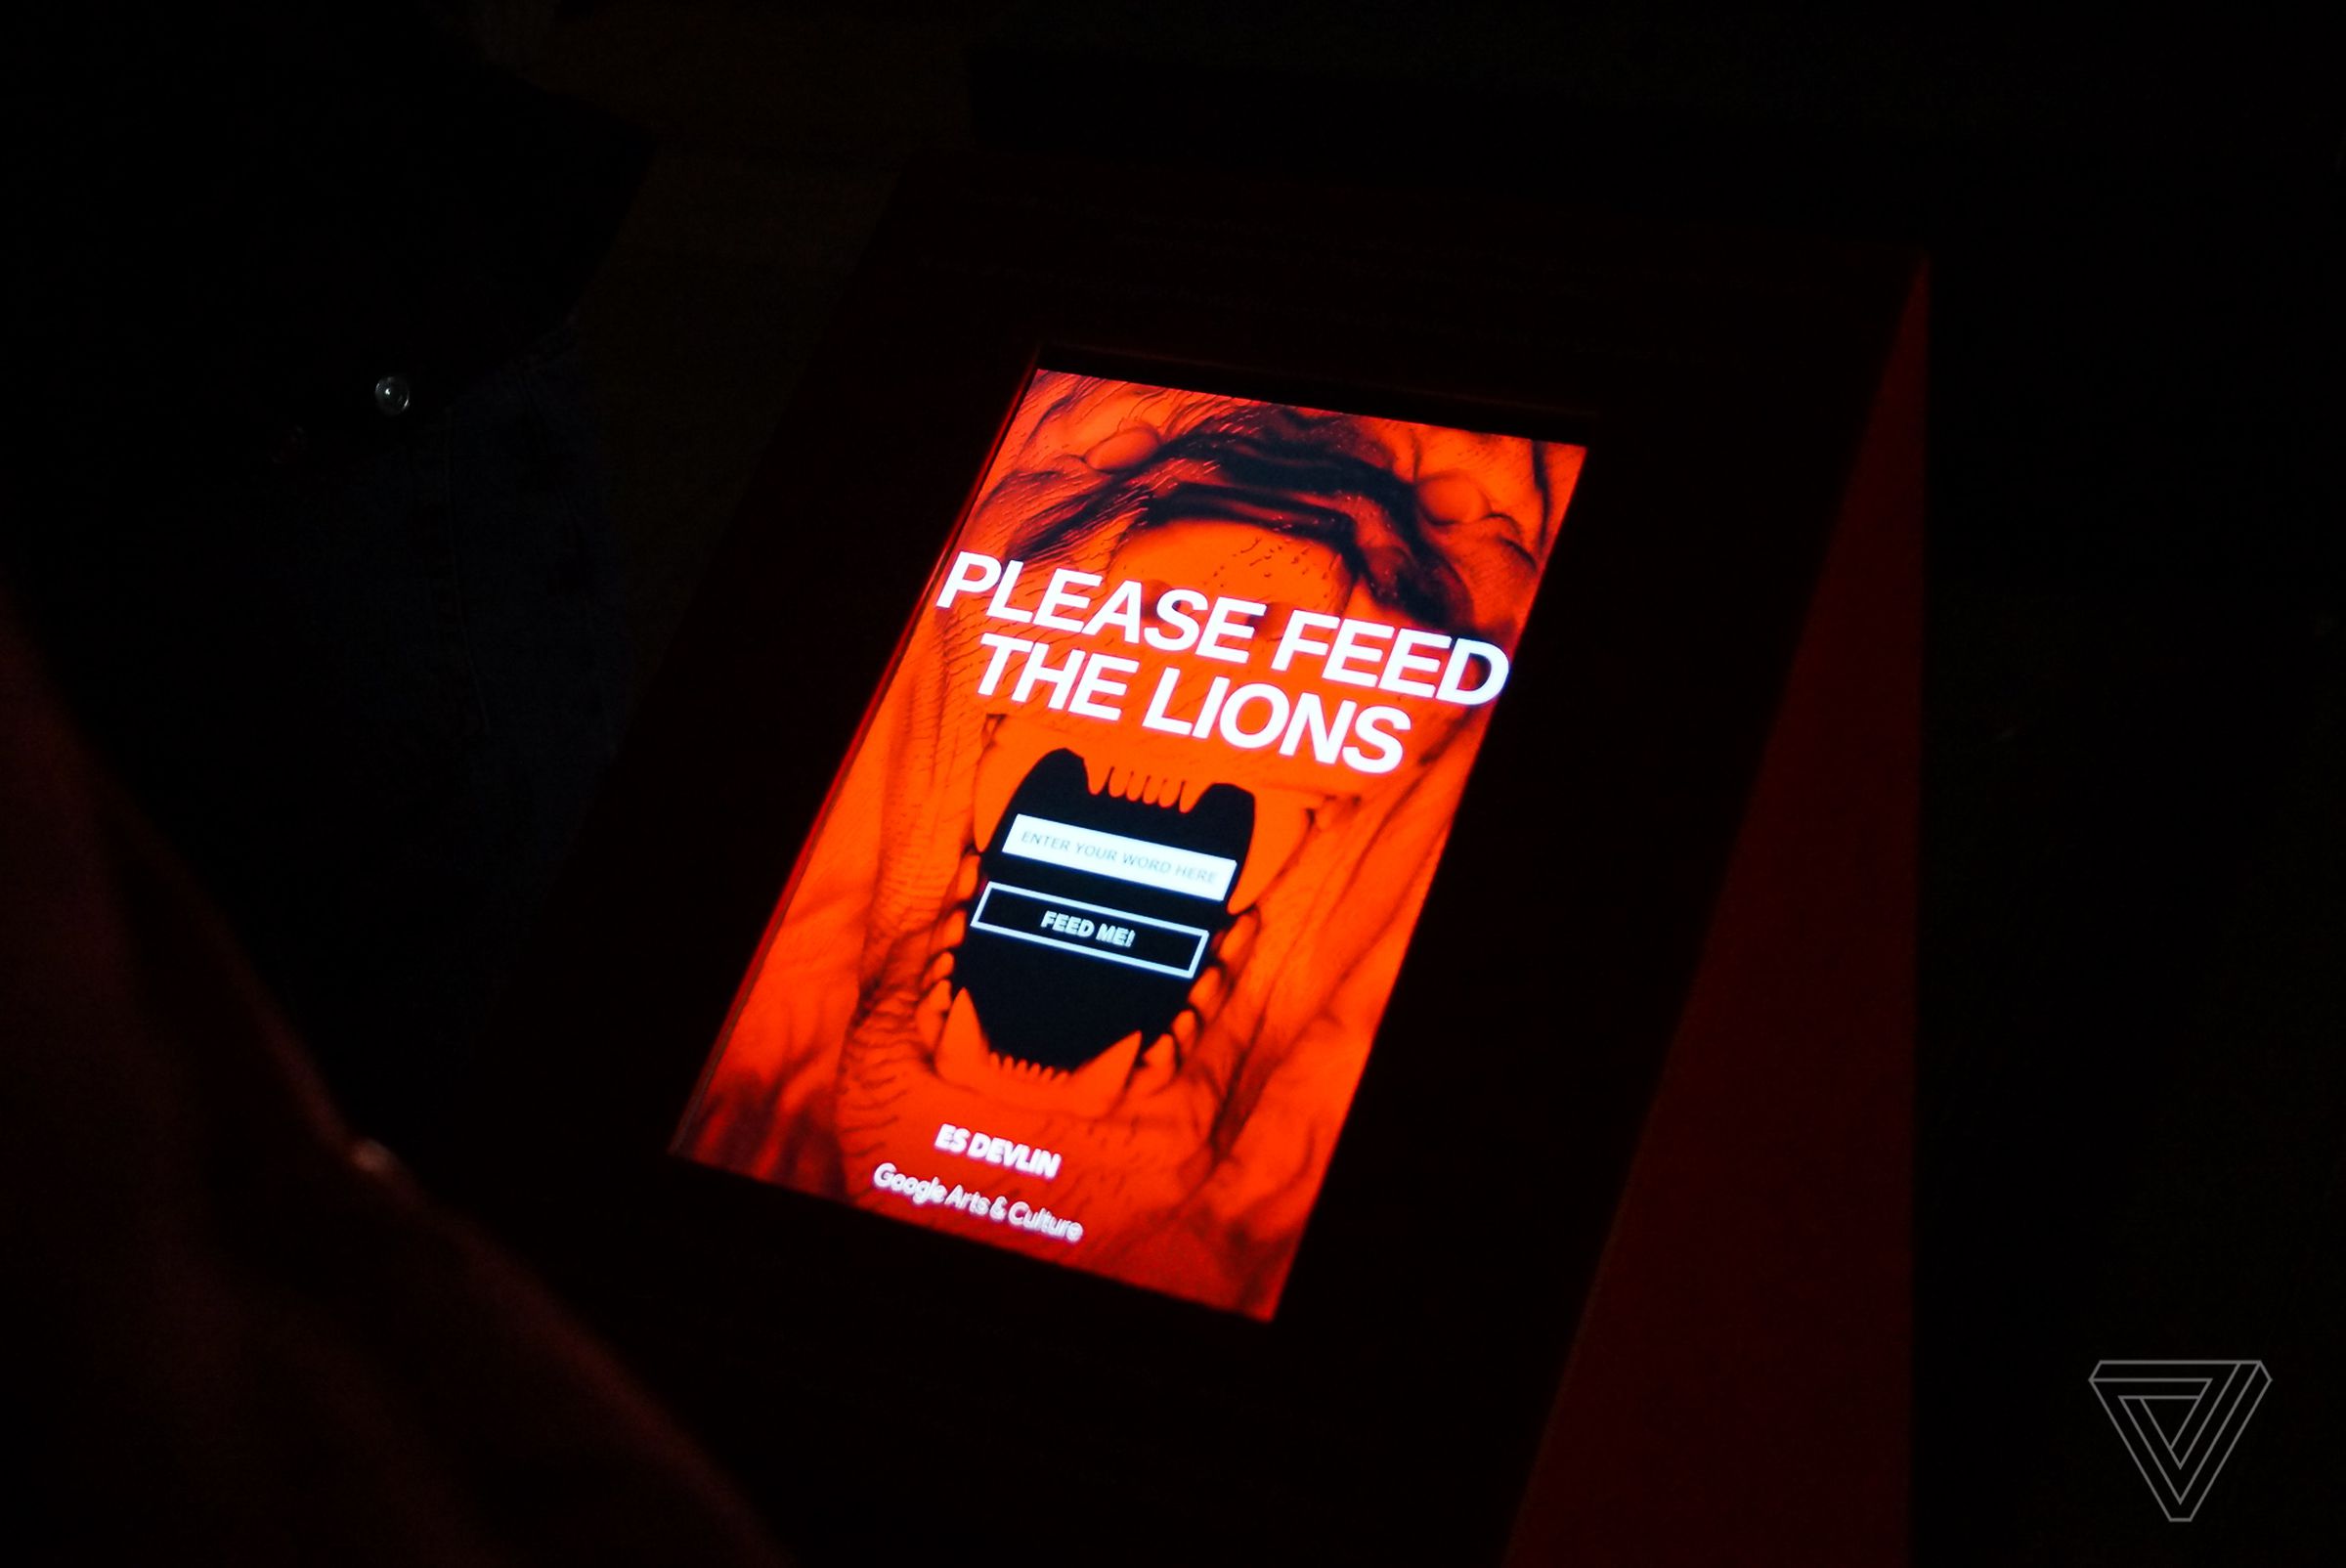 You “feed” the lion words using a tablet.